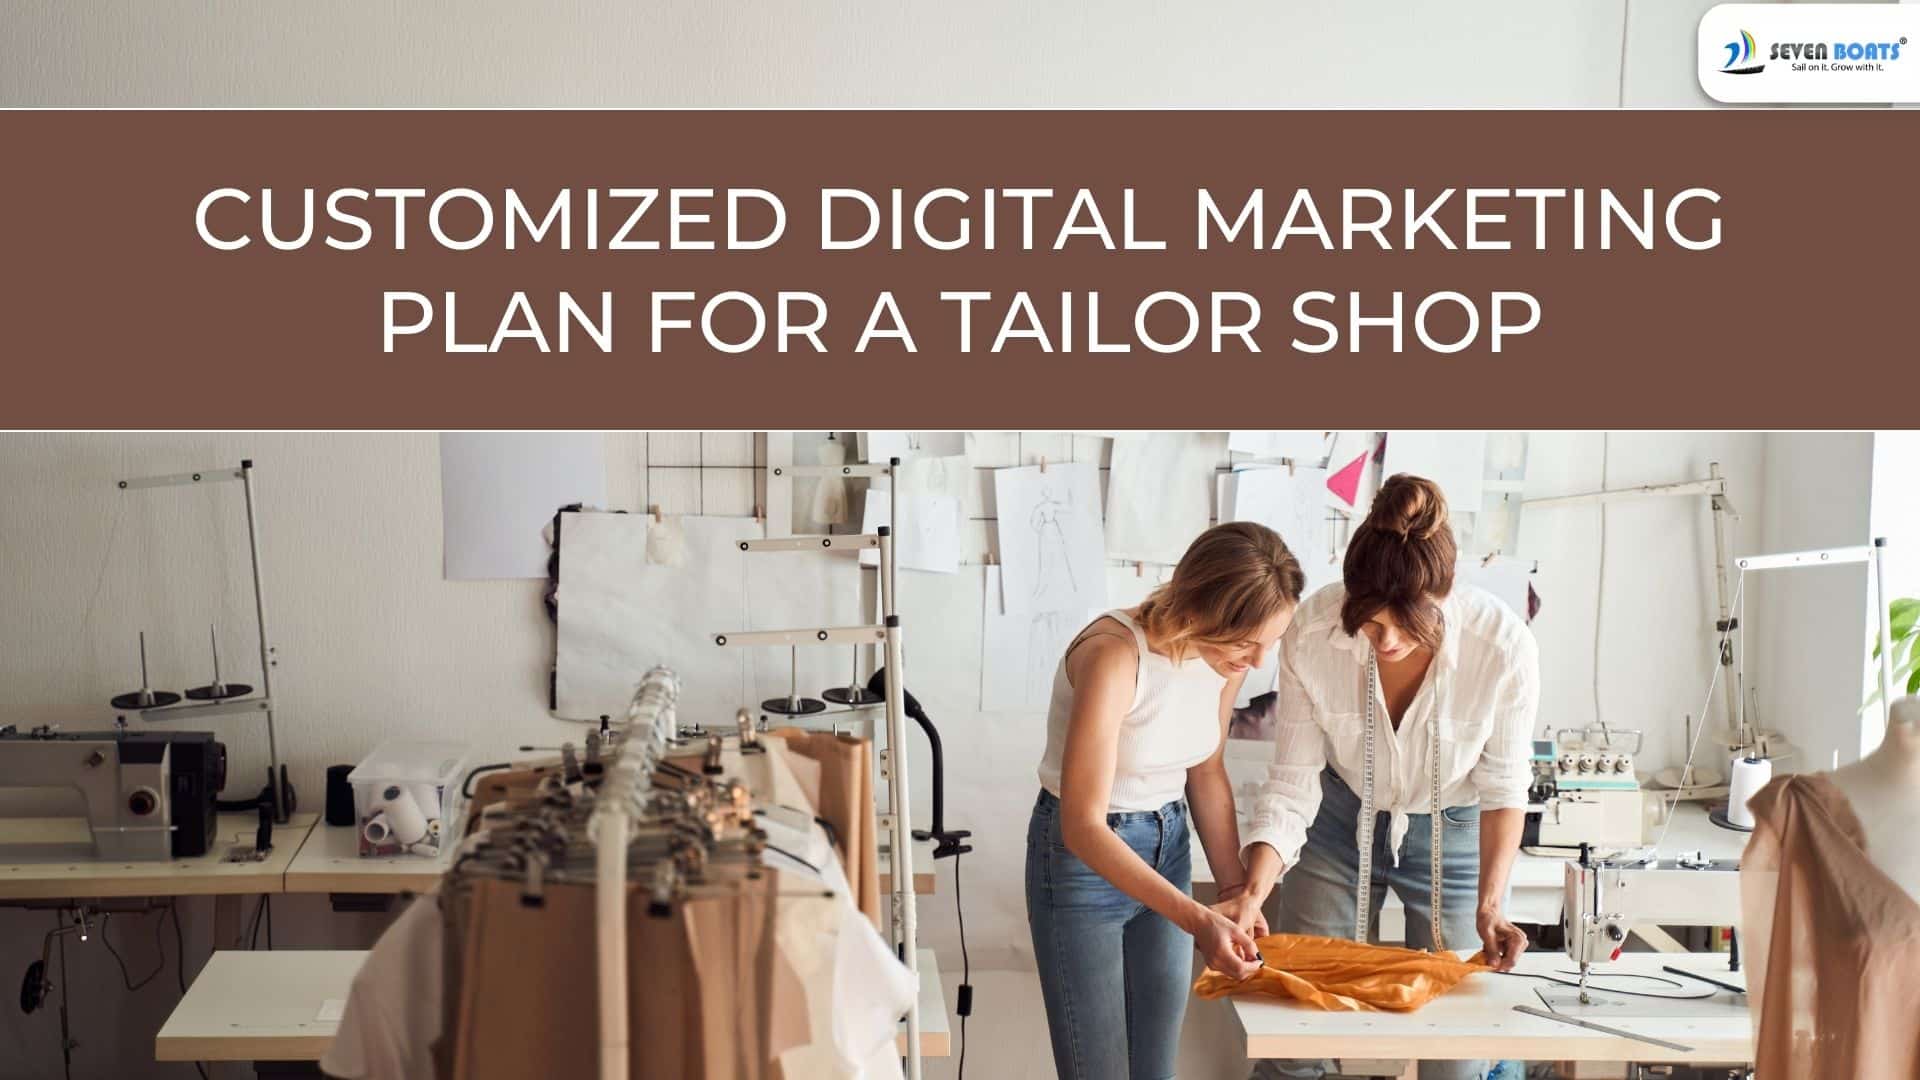 Customized Digital Marketing Plan For A Tailor Shop